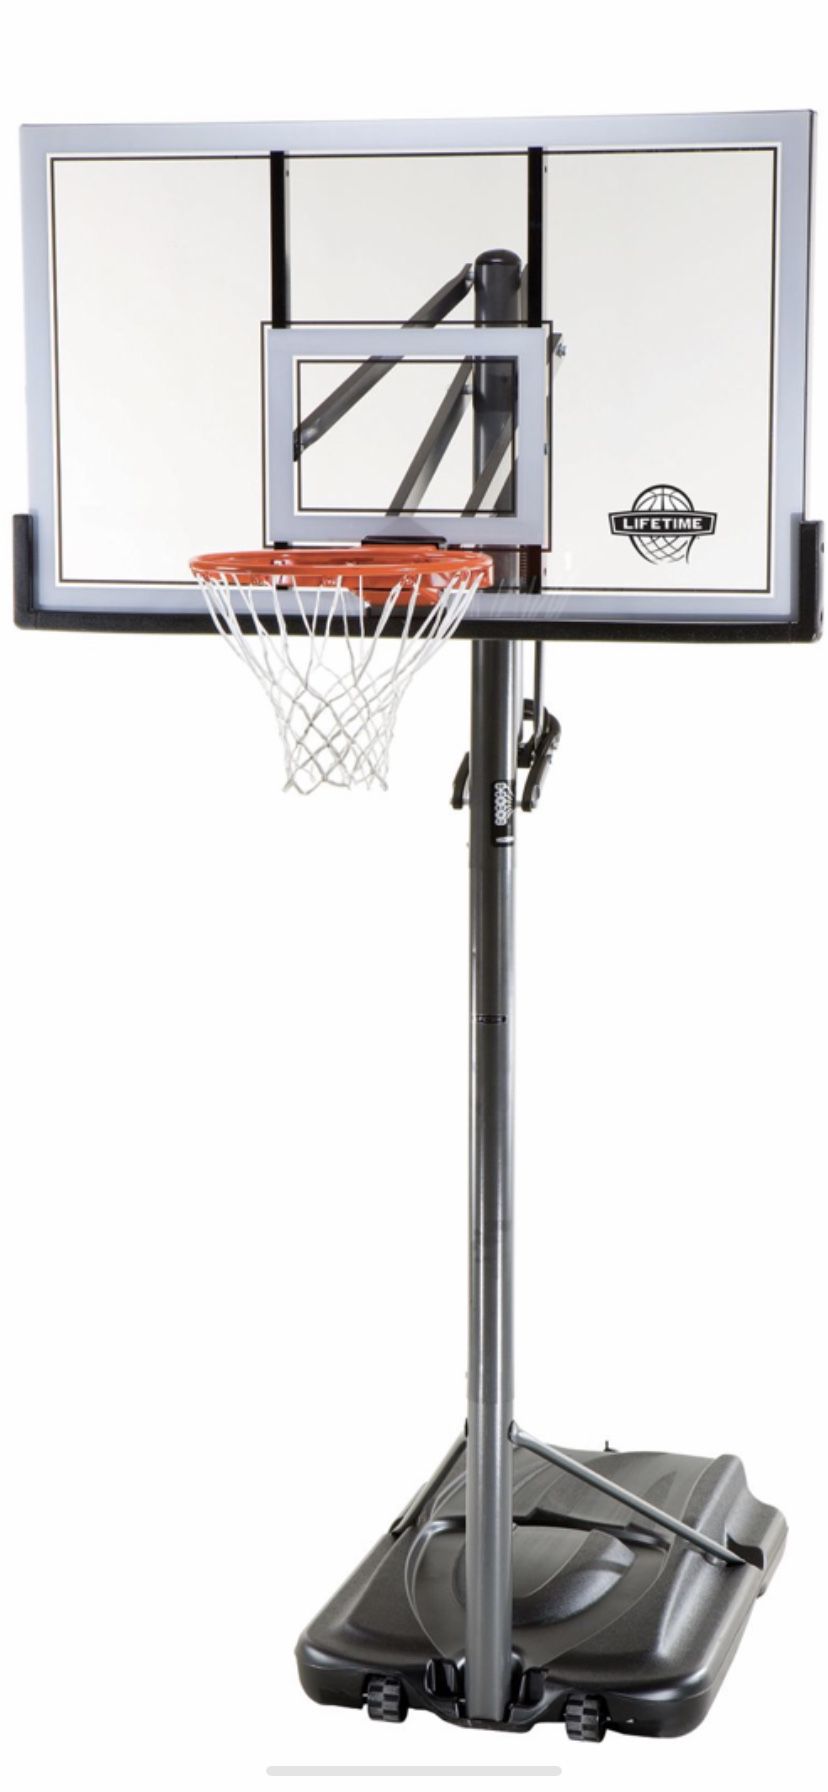 8 - 10 ft high basketball hoop. Fun for the entire family!